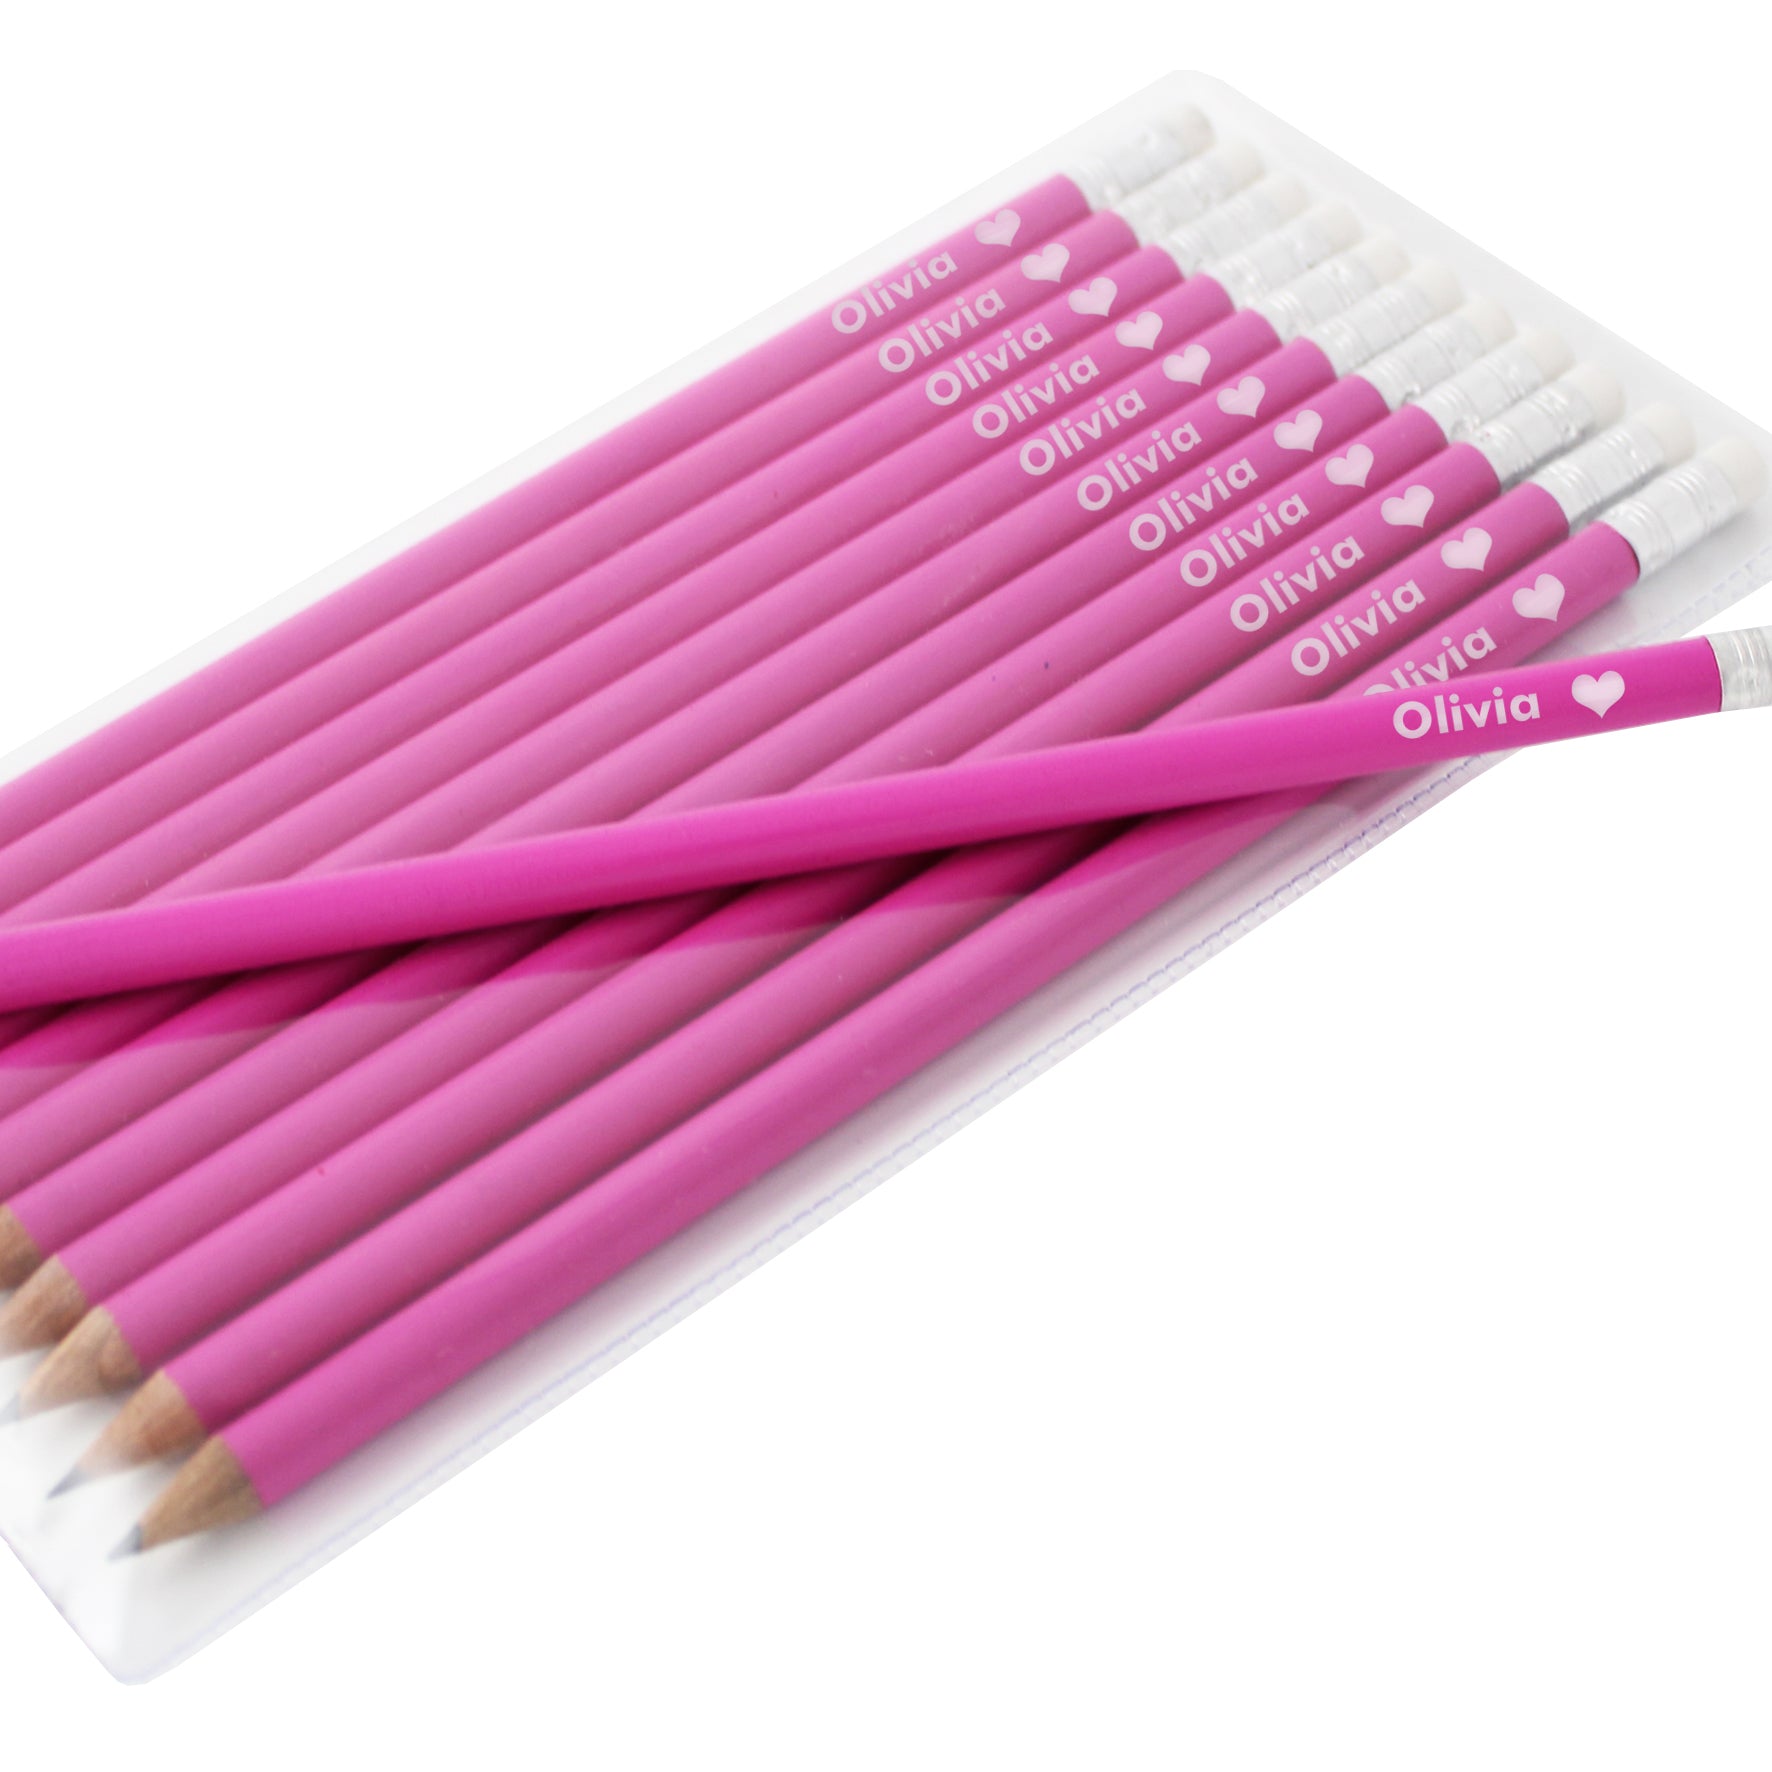 Heart motif pink pencils, personalised - Lilybet loves